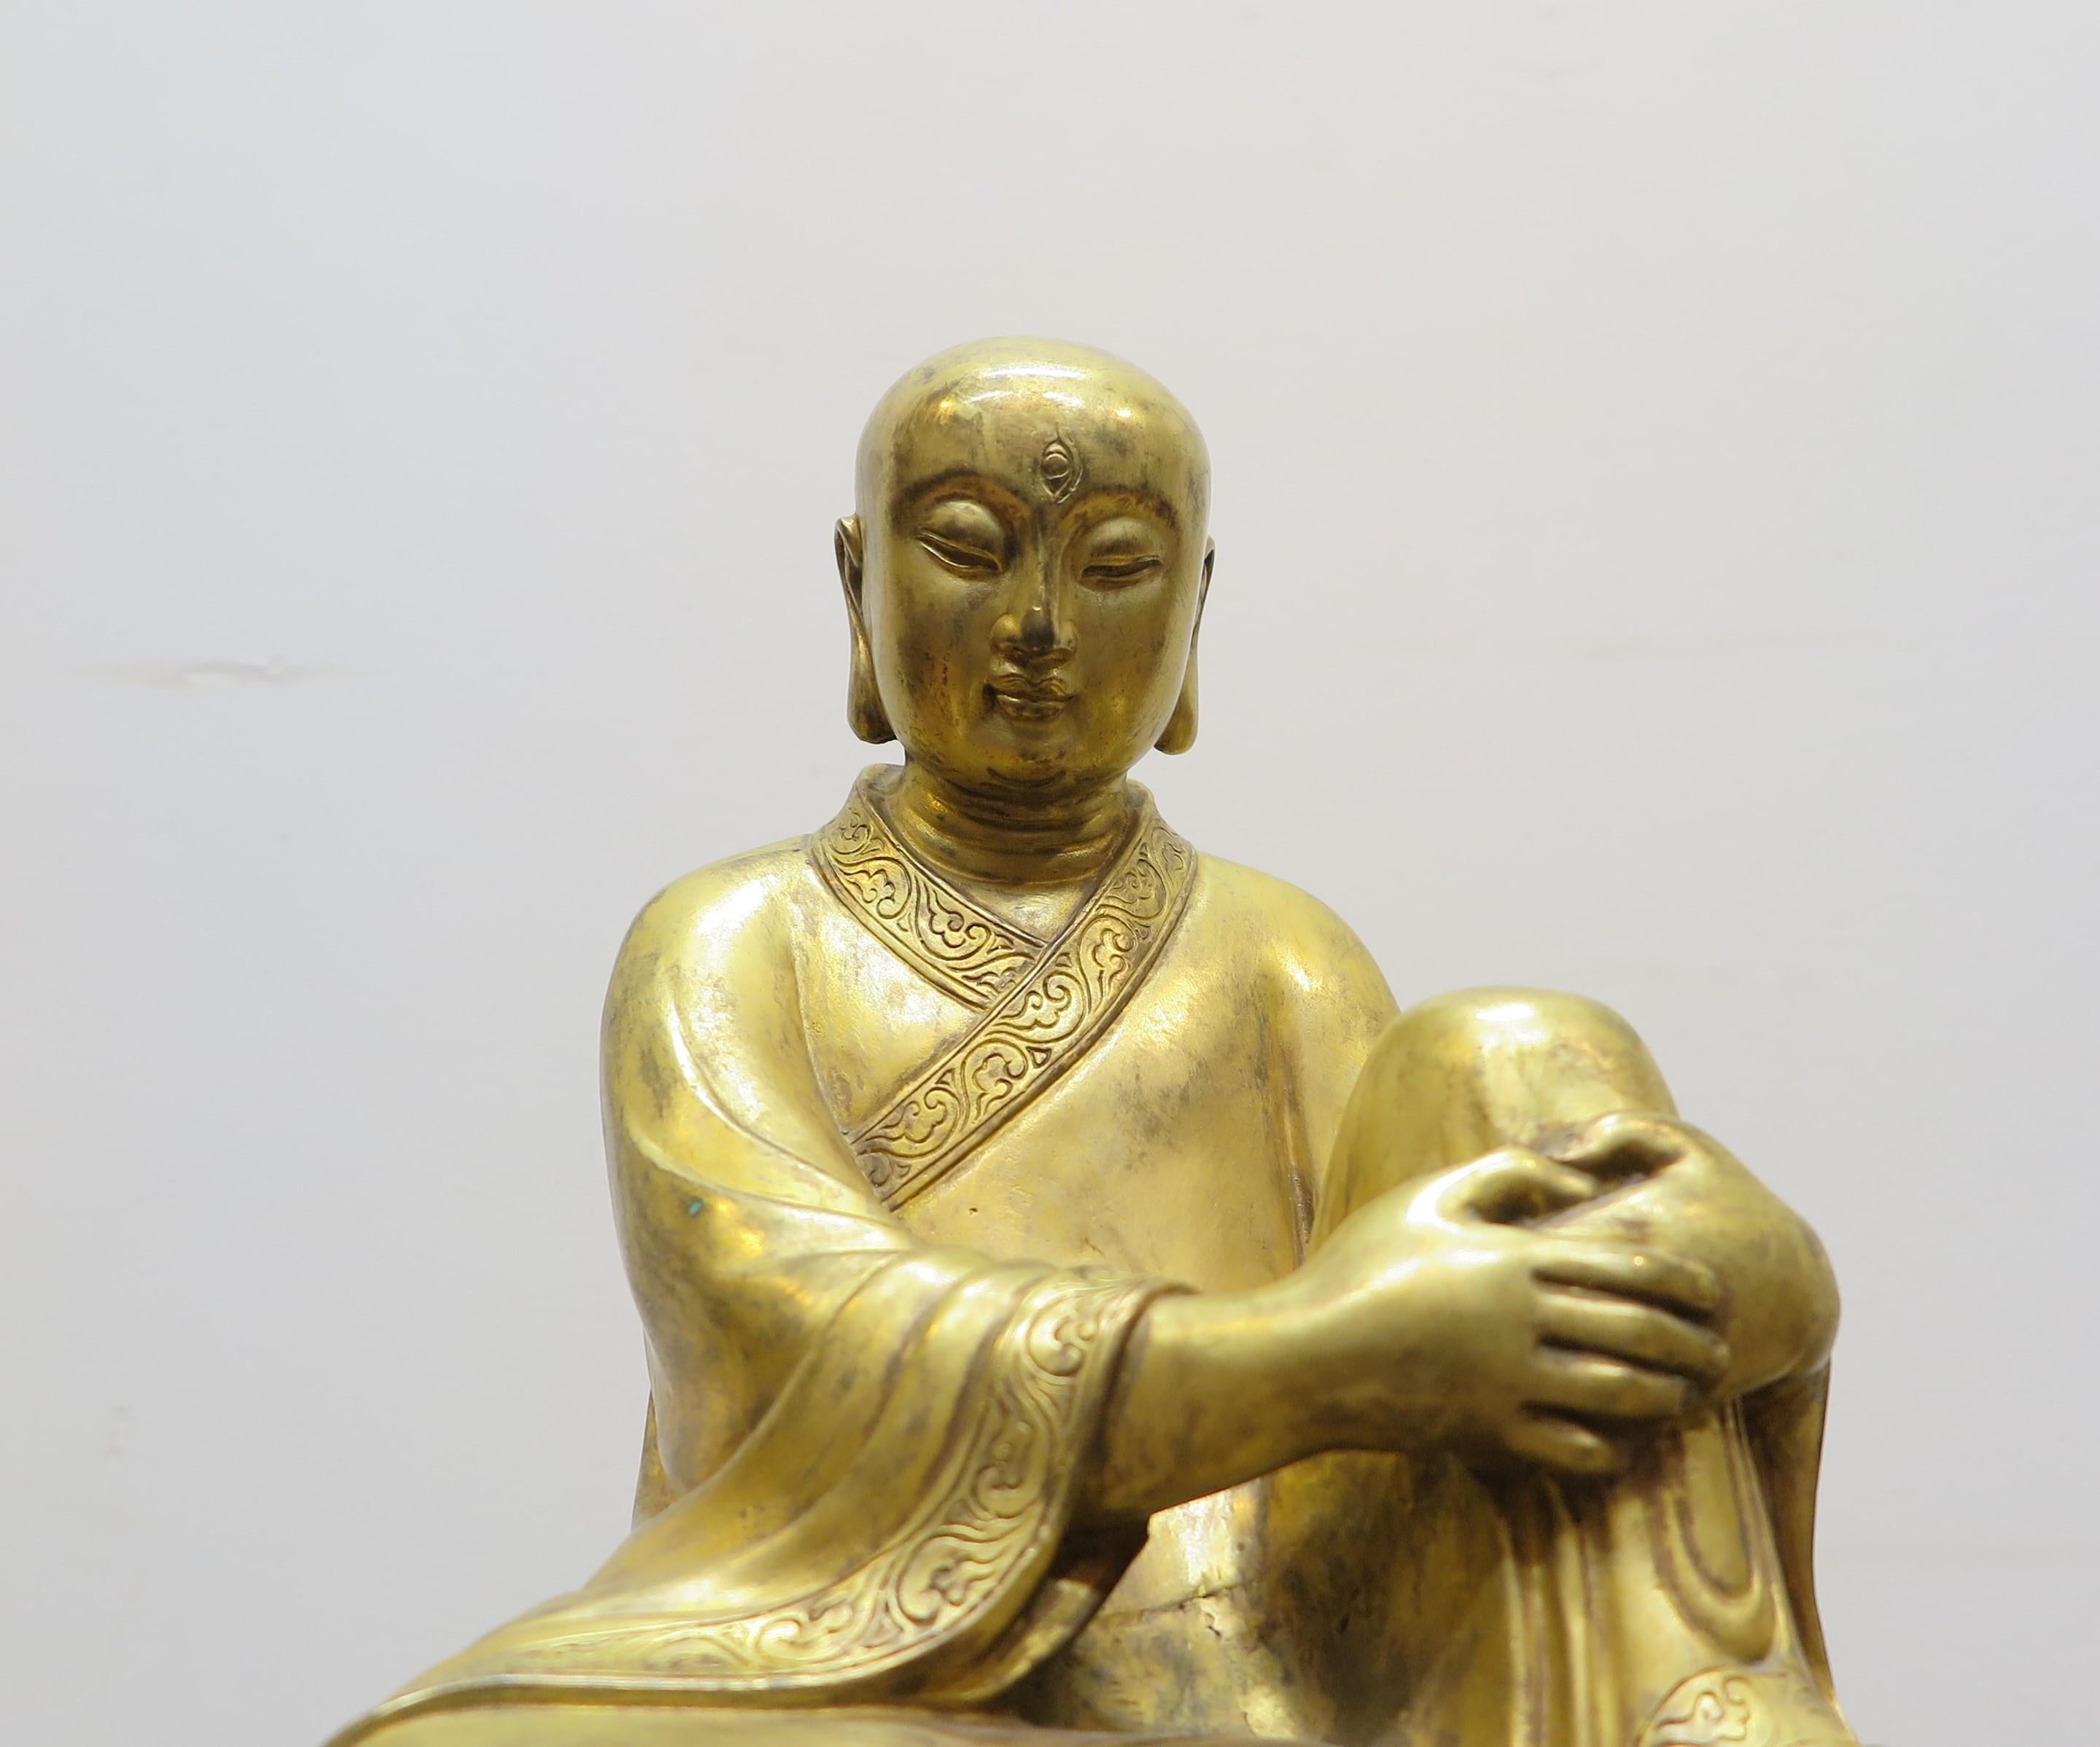 Gilded Bronze Buddhist Buddha statue. Serene casting of Enlightened Buddha Buddhist Monk seated on altar bench. A very sensitive detailed capture in bronze gilded with 24 karat gold leaf. Exquisite countenance. Detail etching surrounds the edge of